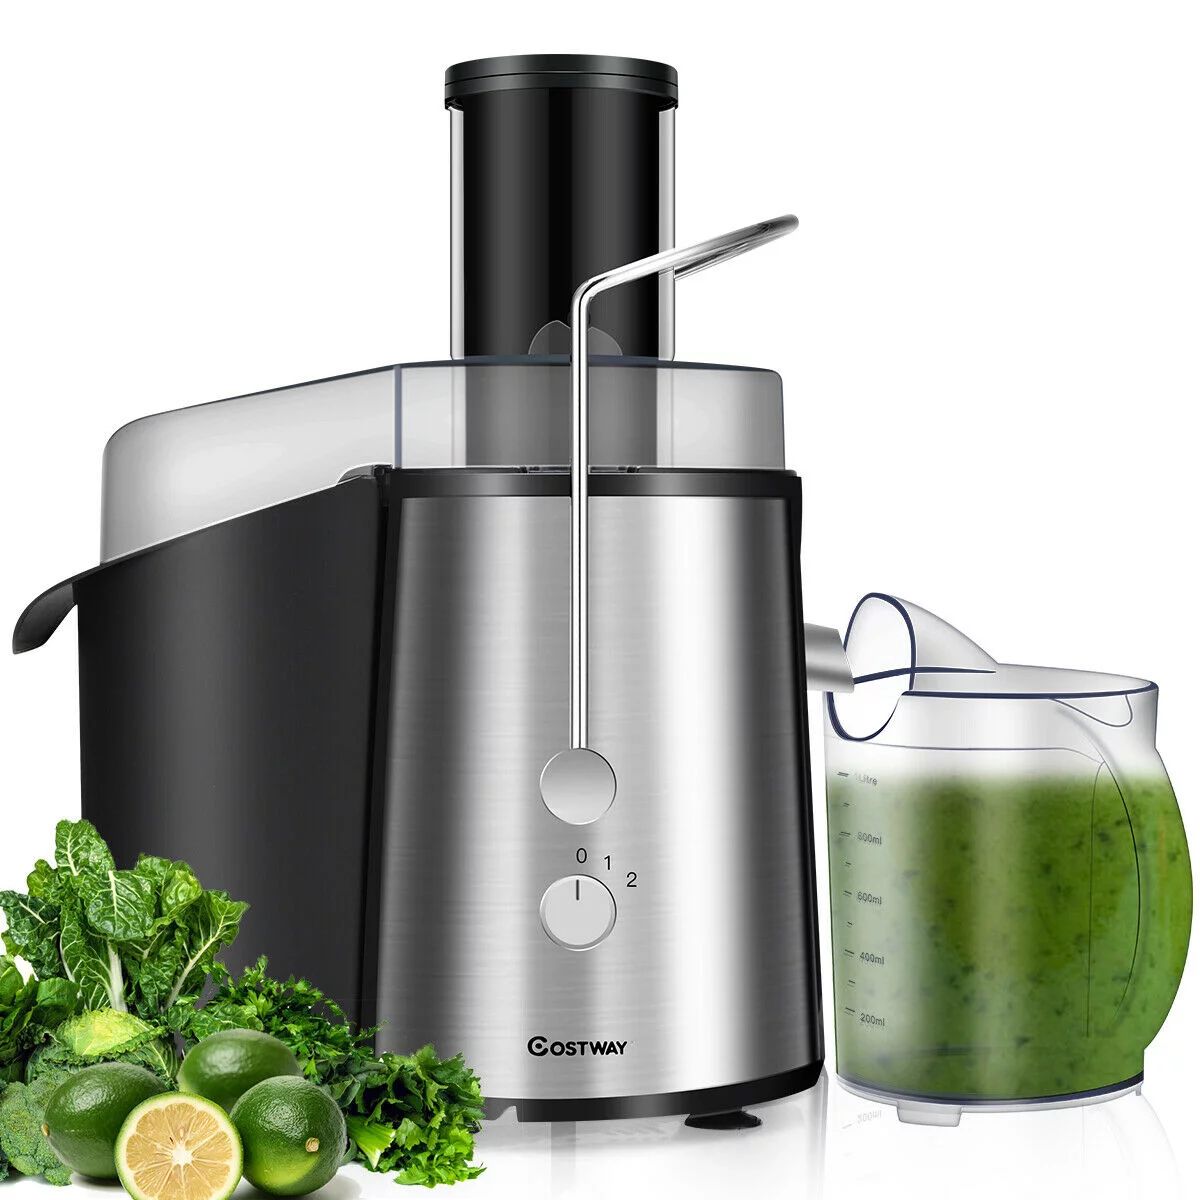 Costway Electric Juicer Wide Mouth Fruit & Vegetable Centrifugal Juice Extractor 2 Speed | Walmart (US)